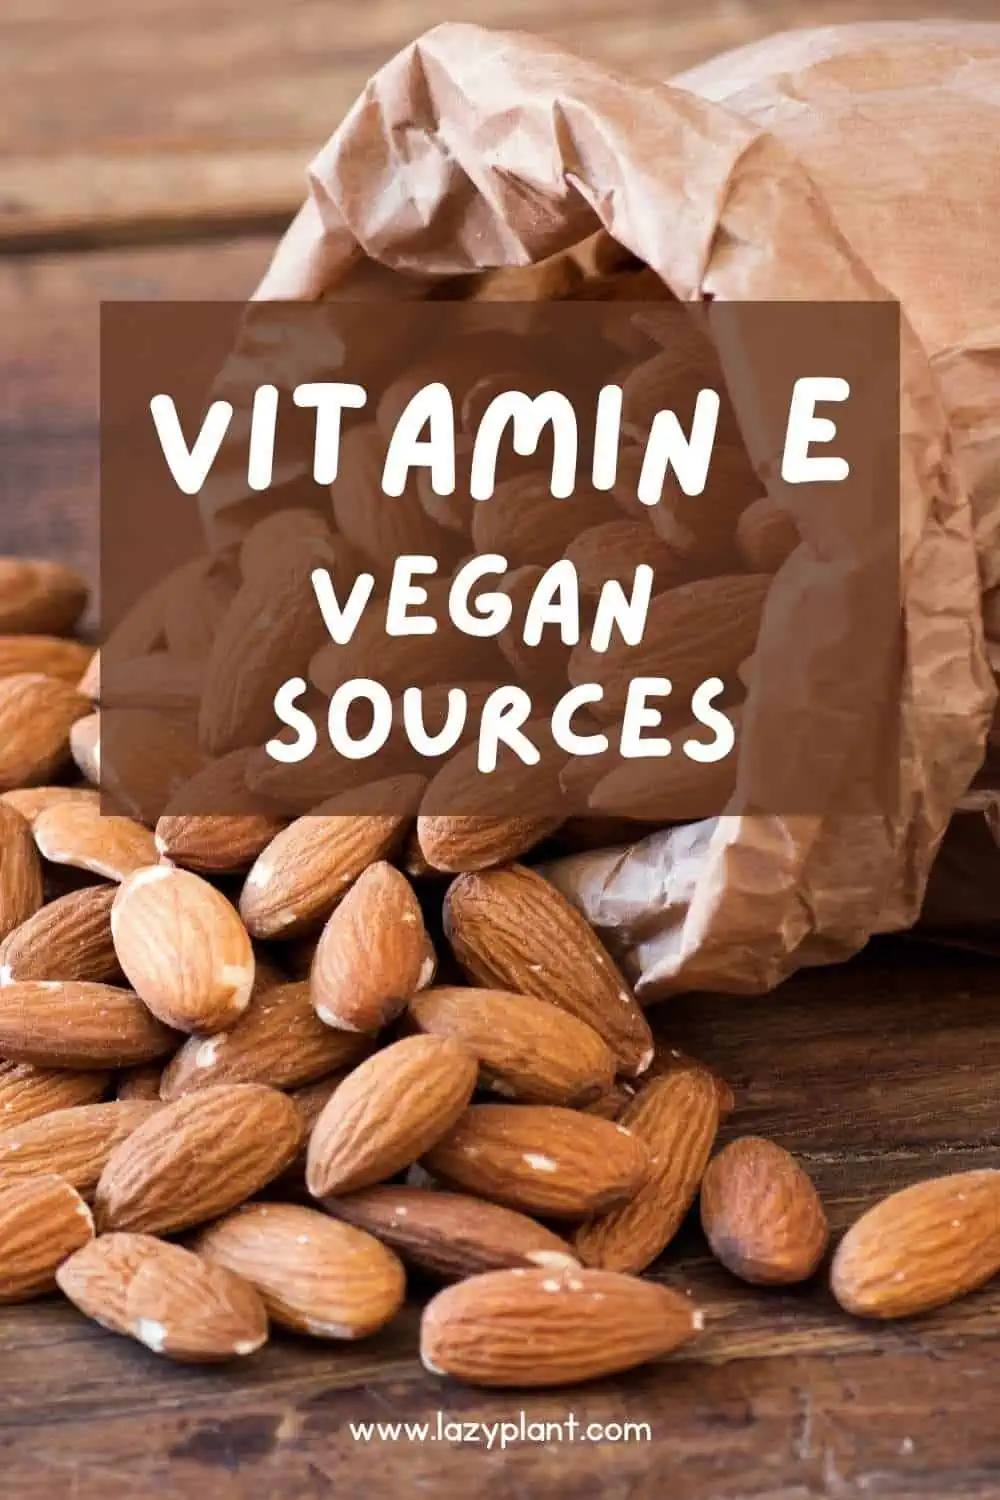 A list of the richest vegan foods in vitamin E.